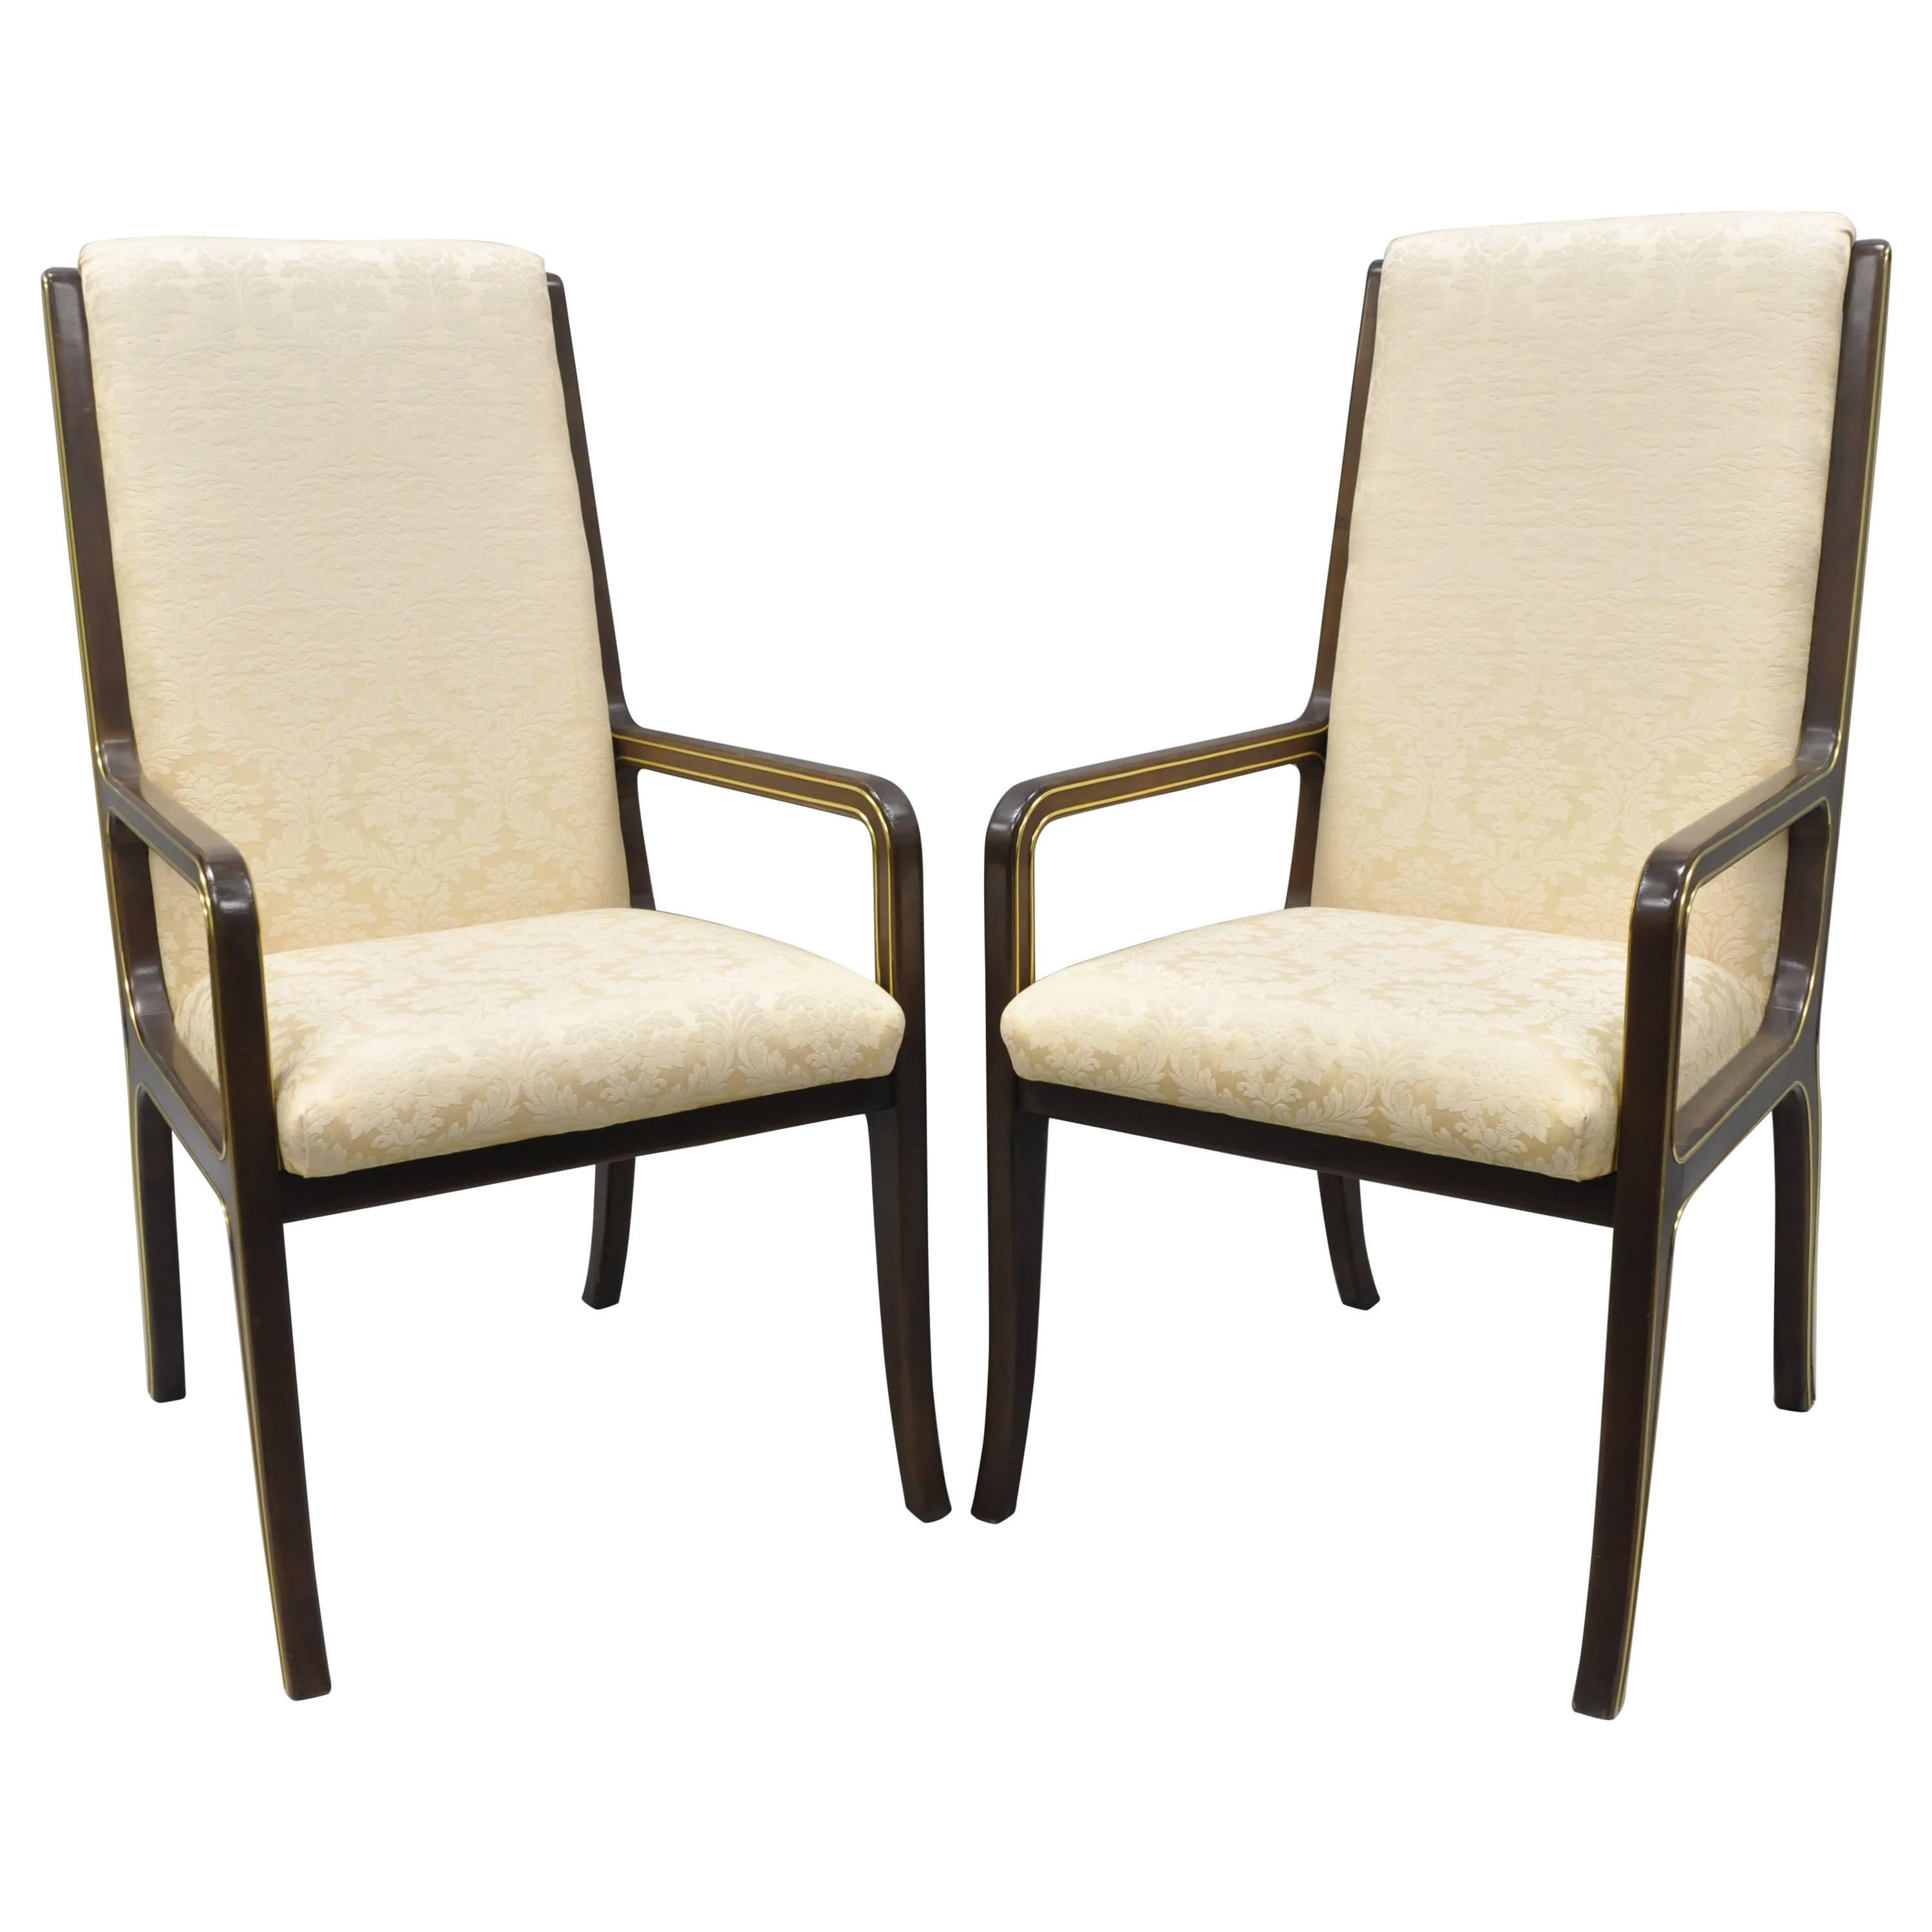 Mastercraft for Baker Brass Inlay Trim Dining Room Chairs Armchairs, Pair